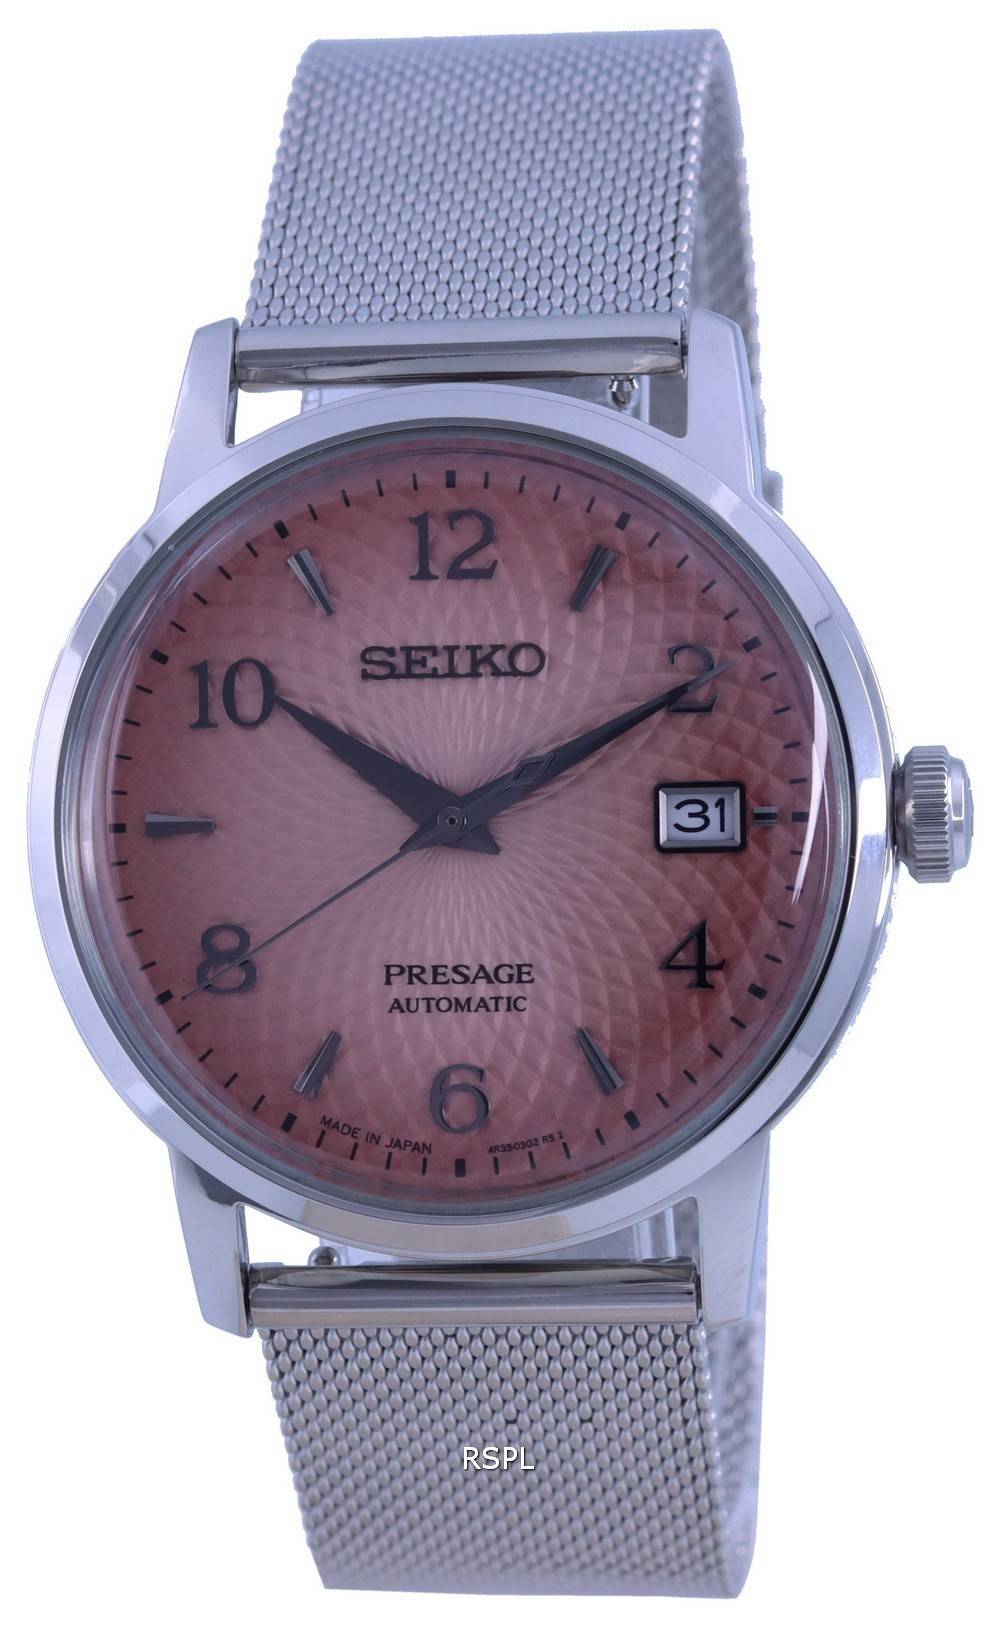 Seiko Presage Cocktail Time Tequila Sunset Limited Edition Automatic SRPE47 SRPE47J1 SRPE47J Mens Watch